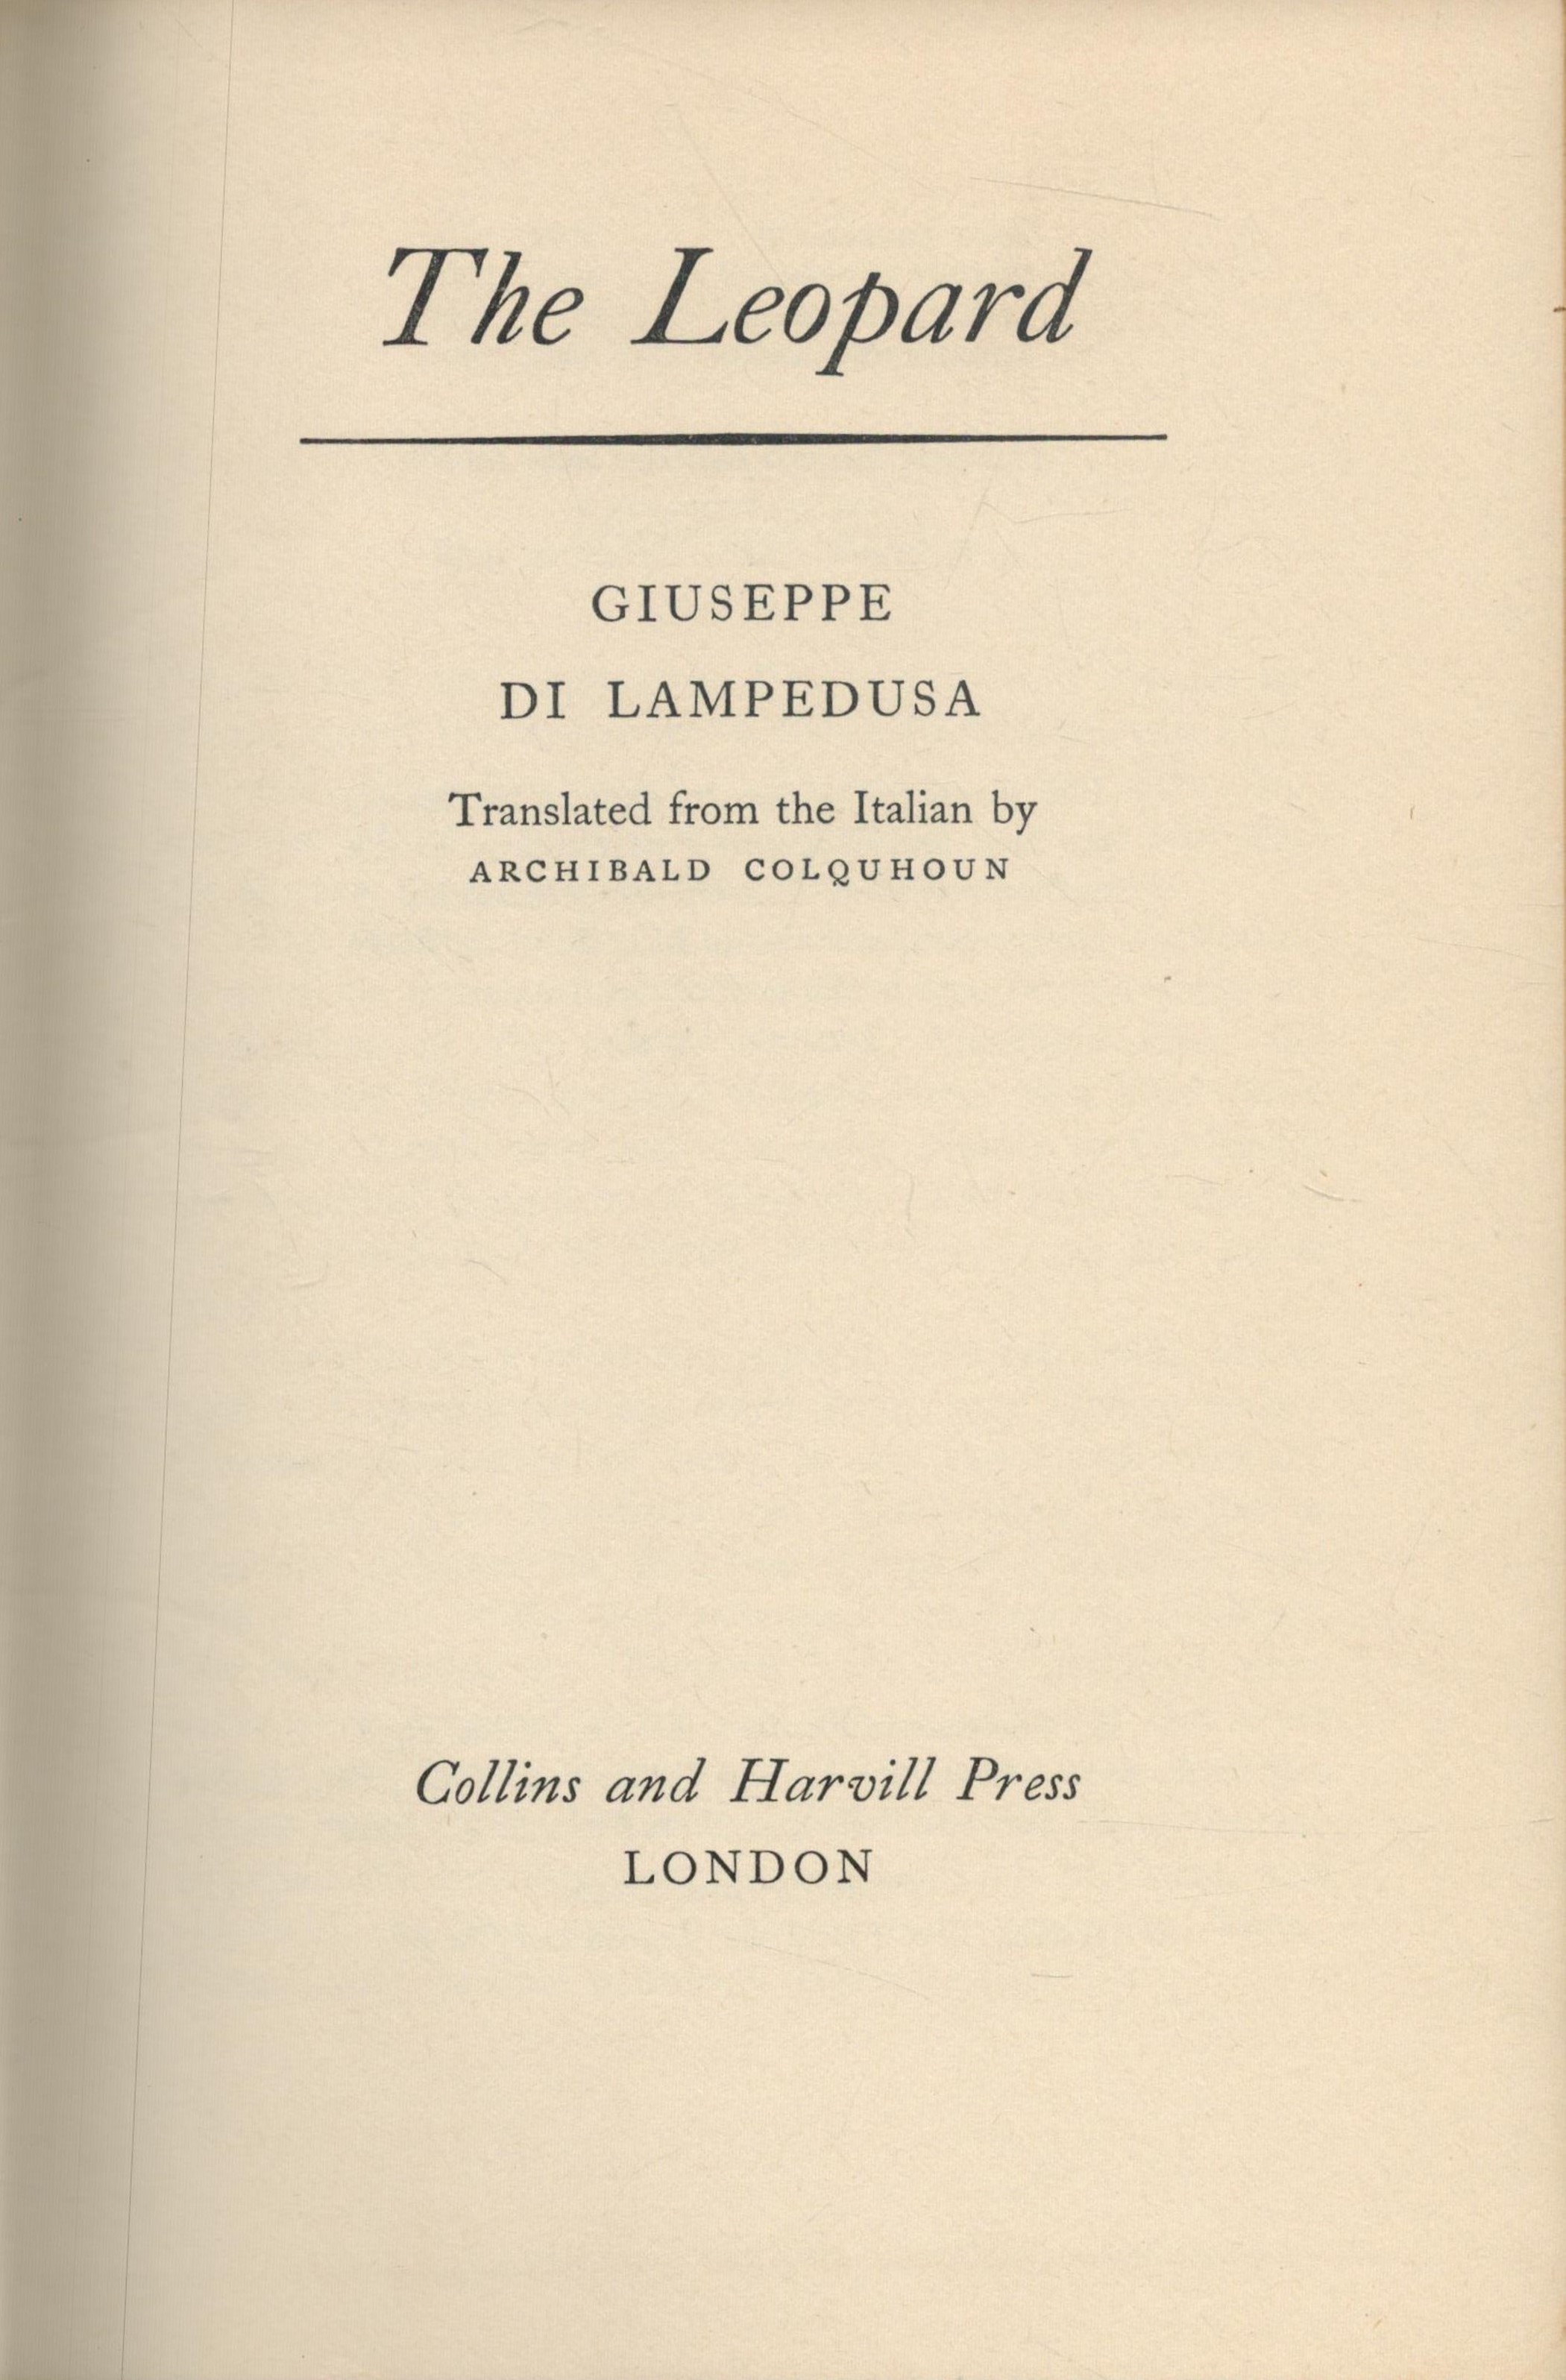 The Leopard by Giuseppe Di Lampedusa Translated by Archibald Colquhoun 1960 fourth Impression - Image 2 of 3